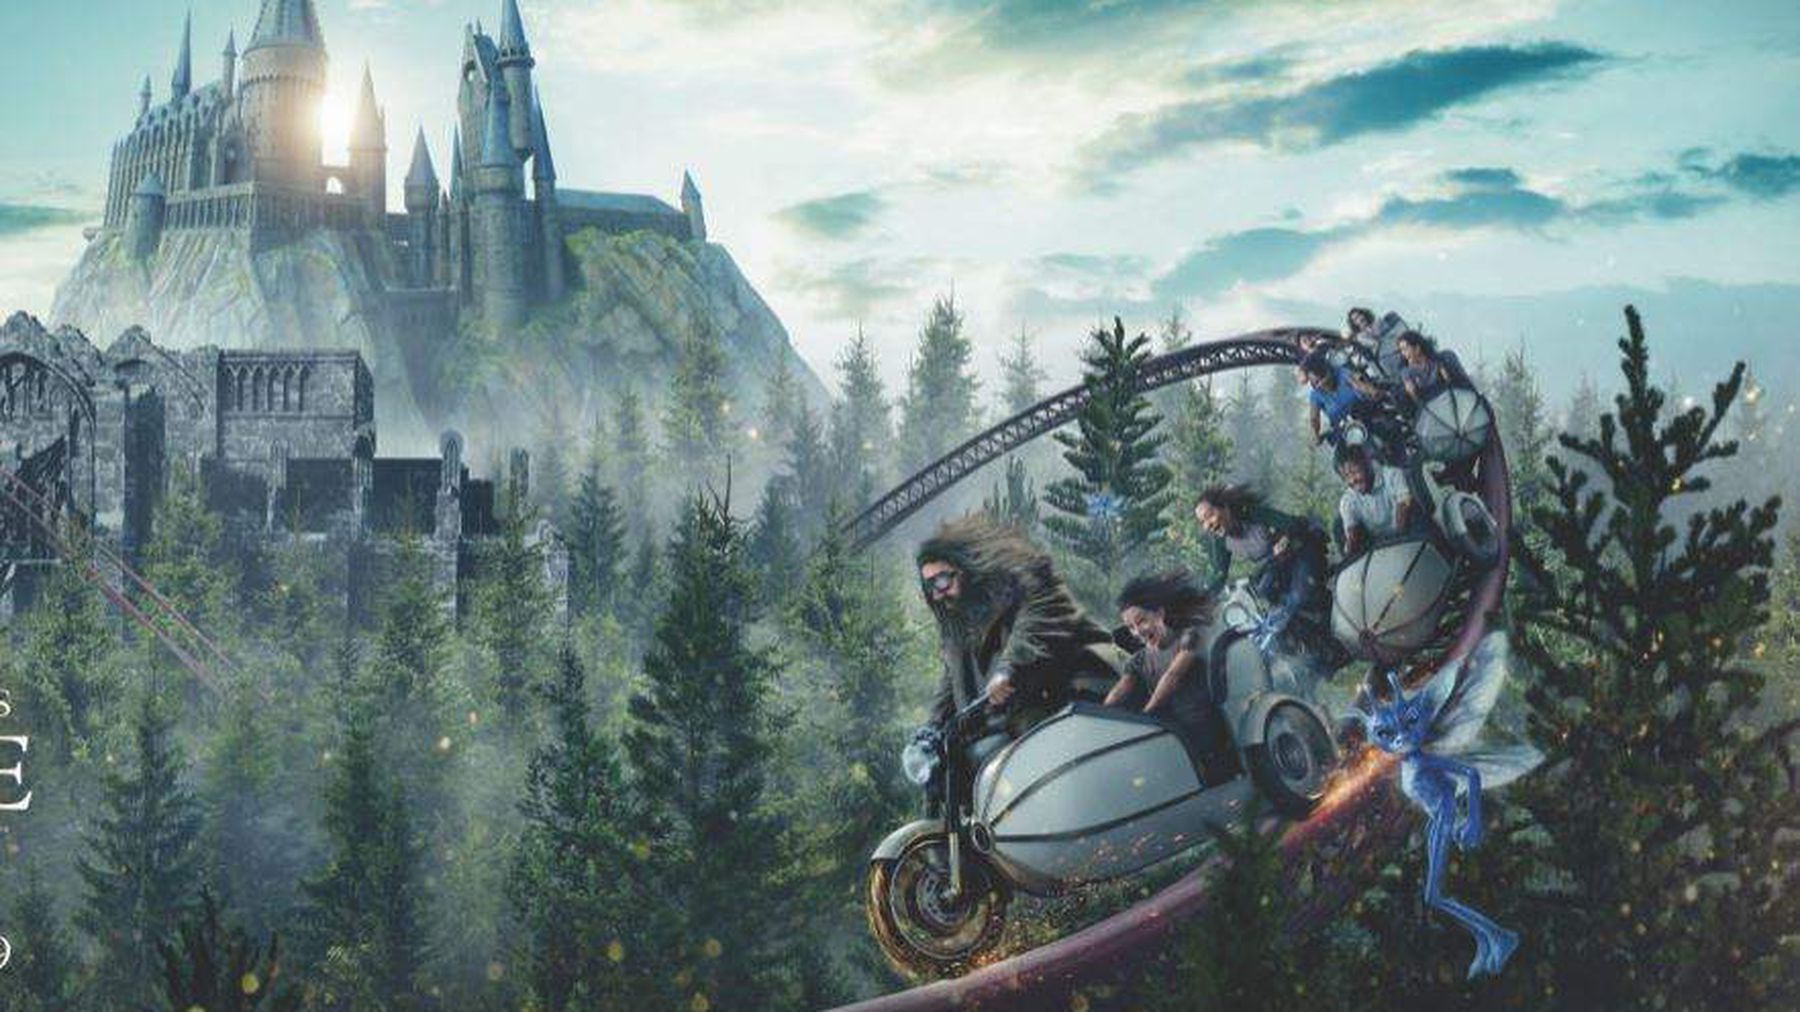 New Hagrid coaster at Universal Orlando will take Harry Potter fans into Forbidden Forest